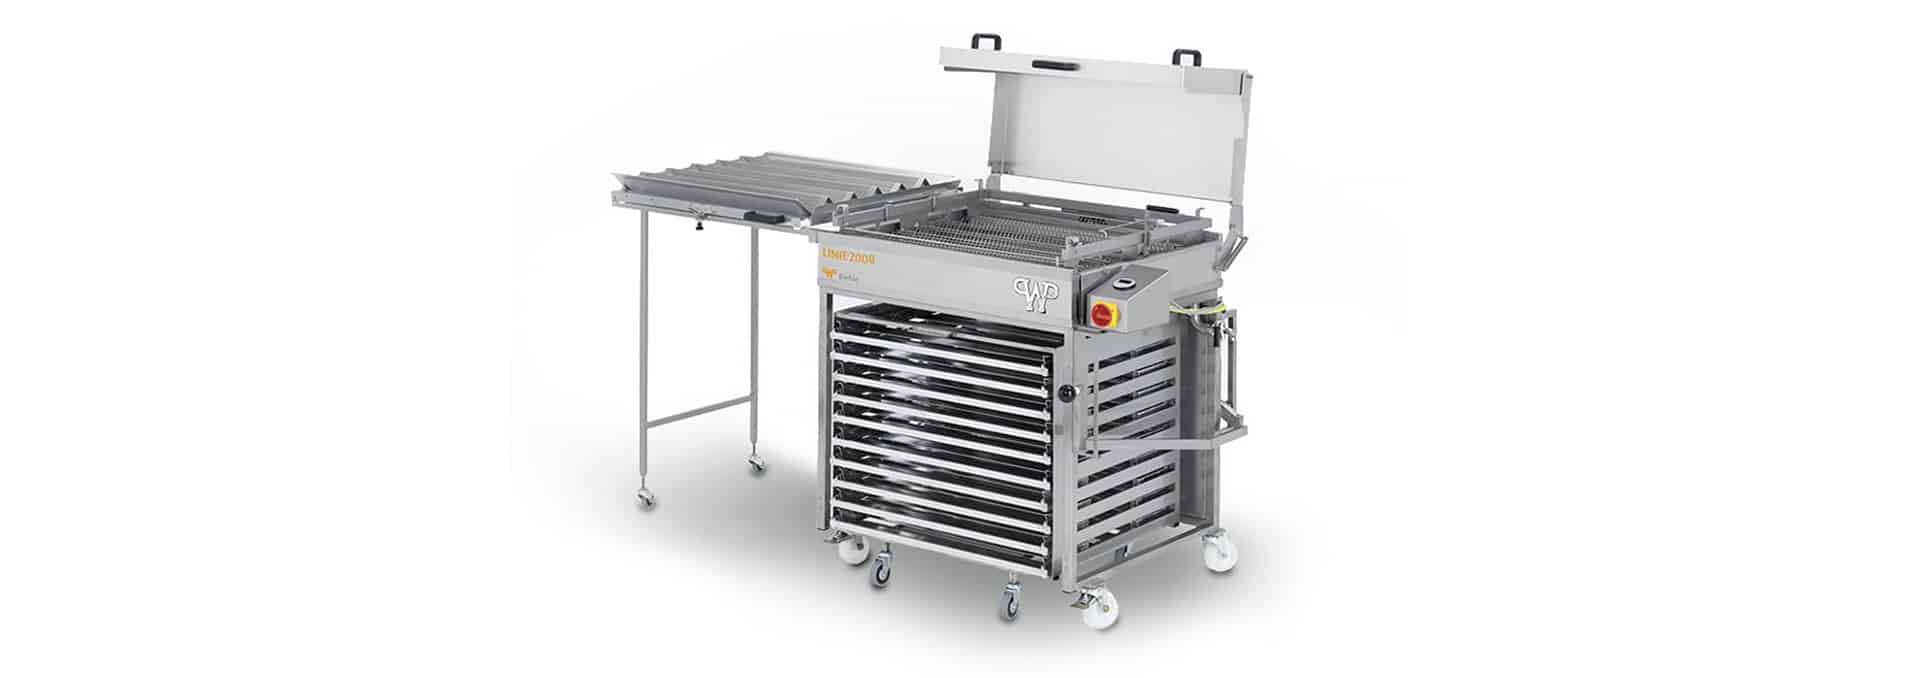 Our WP Riehle L2000 D Deep Fryer is the manual deep fryer for excellent results. Commercial and Industrial Bakery Equipment available through WP Bakery Group USA in Shelton, CT